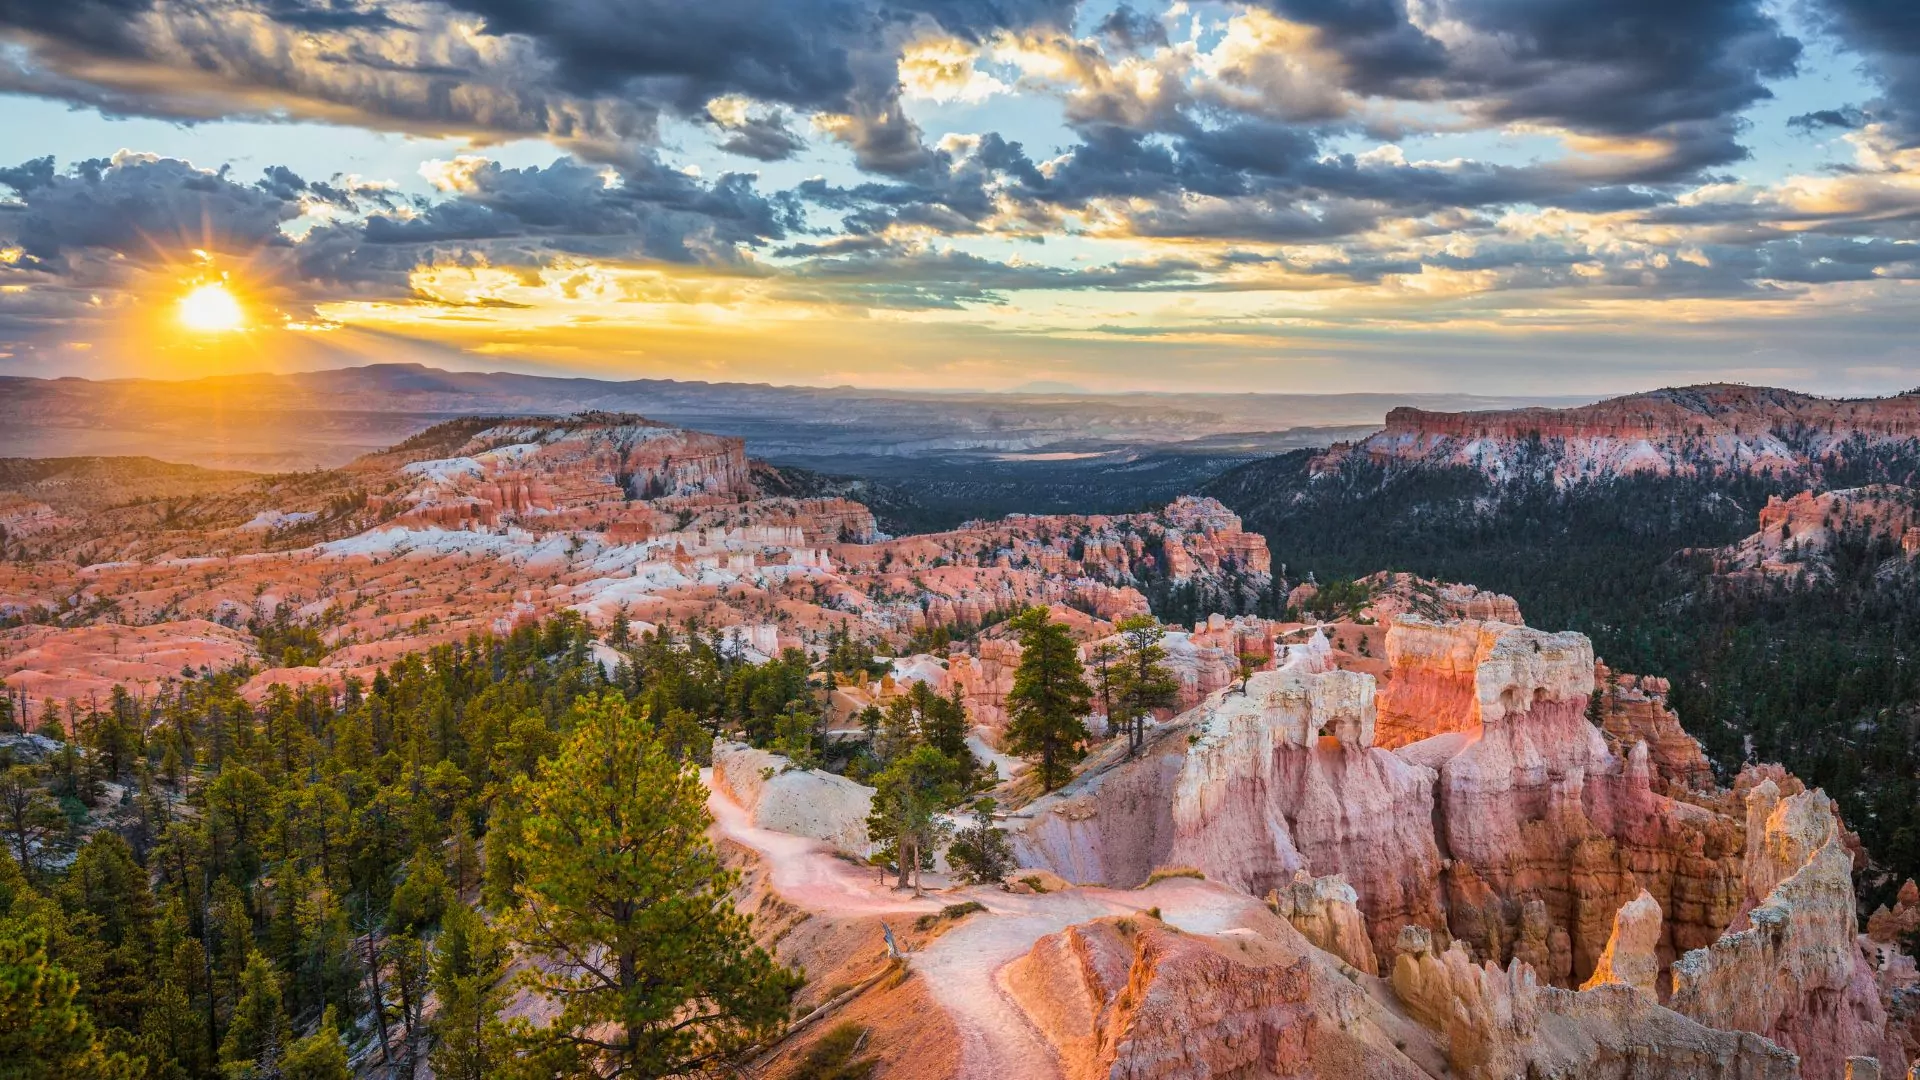 Bryce Canyon National Park hoodoo rock spire formations rise into a sunset sky